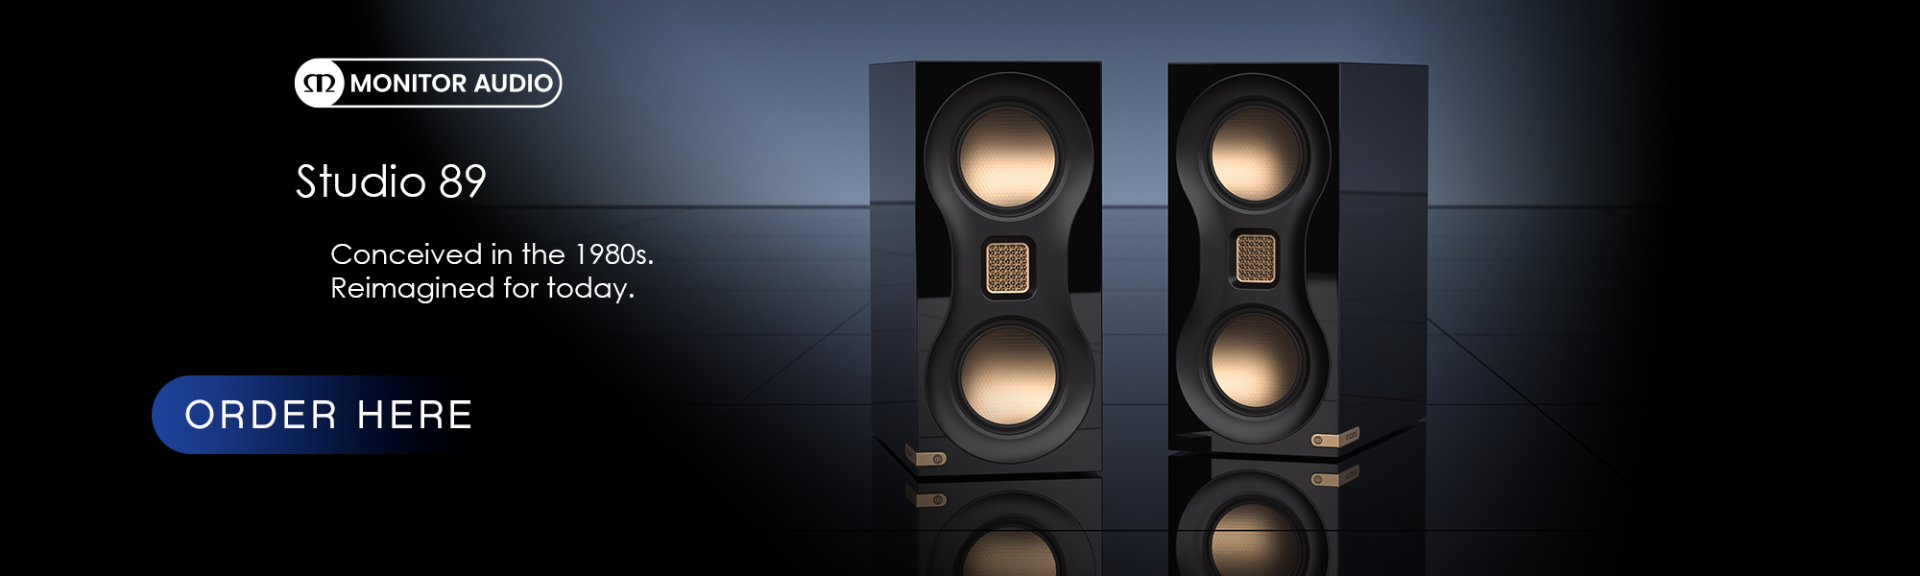 Studio 89 speakers in High Gloss Black with Gold Drivers